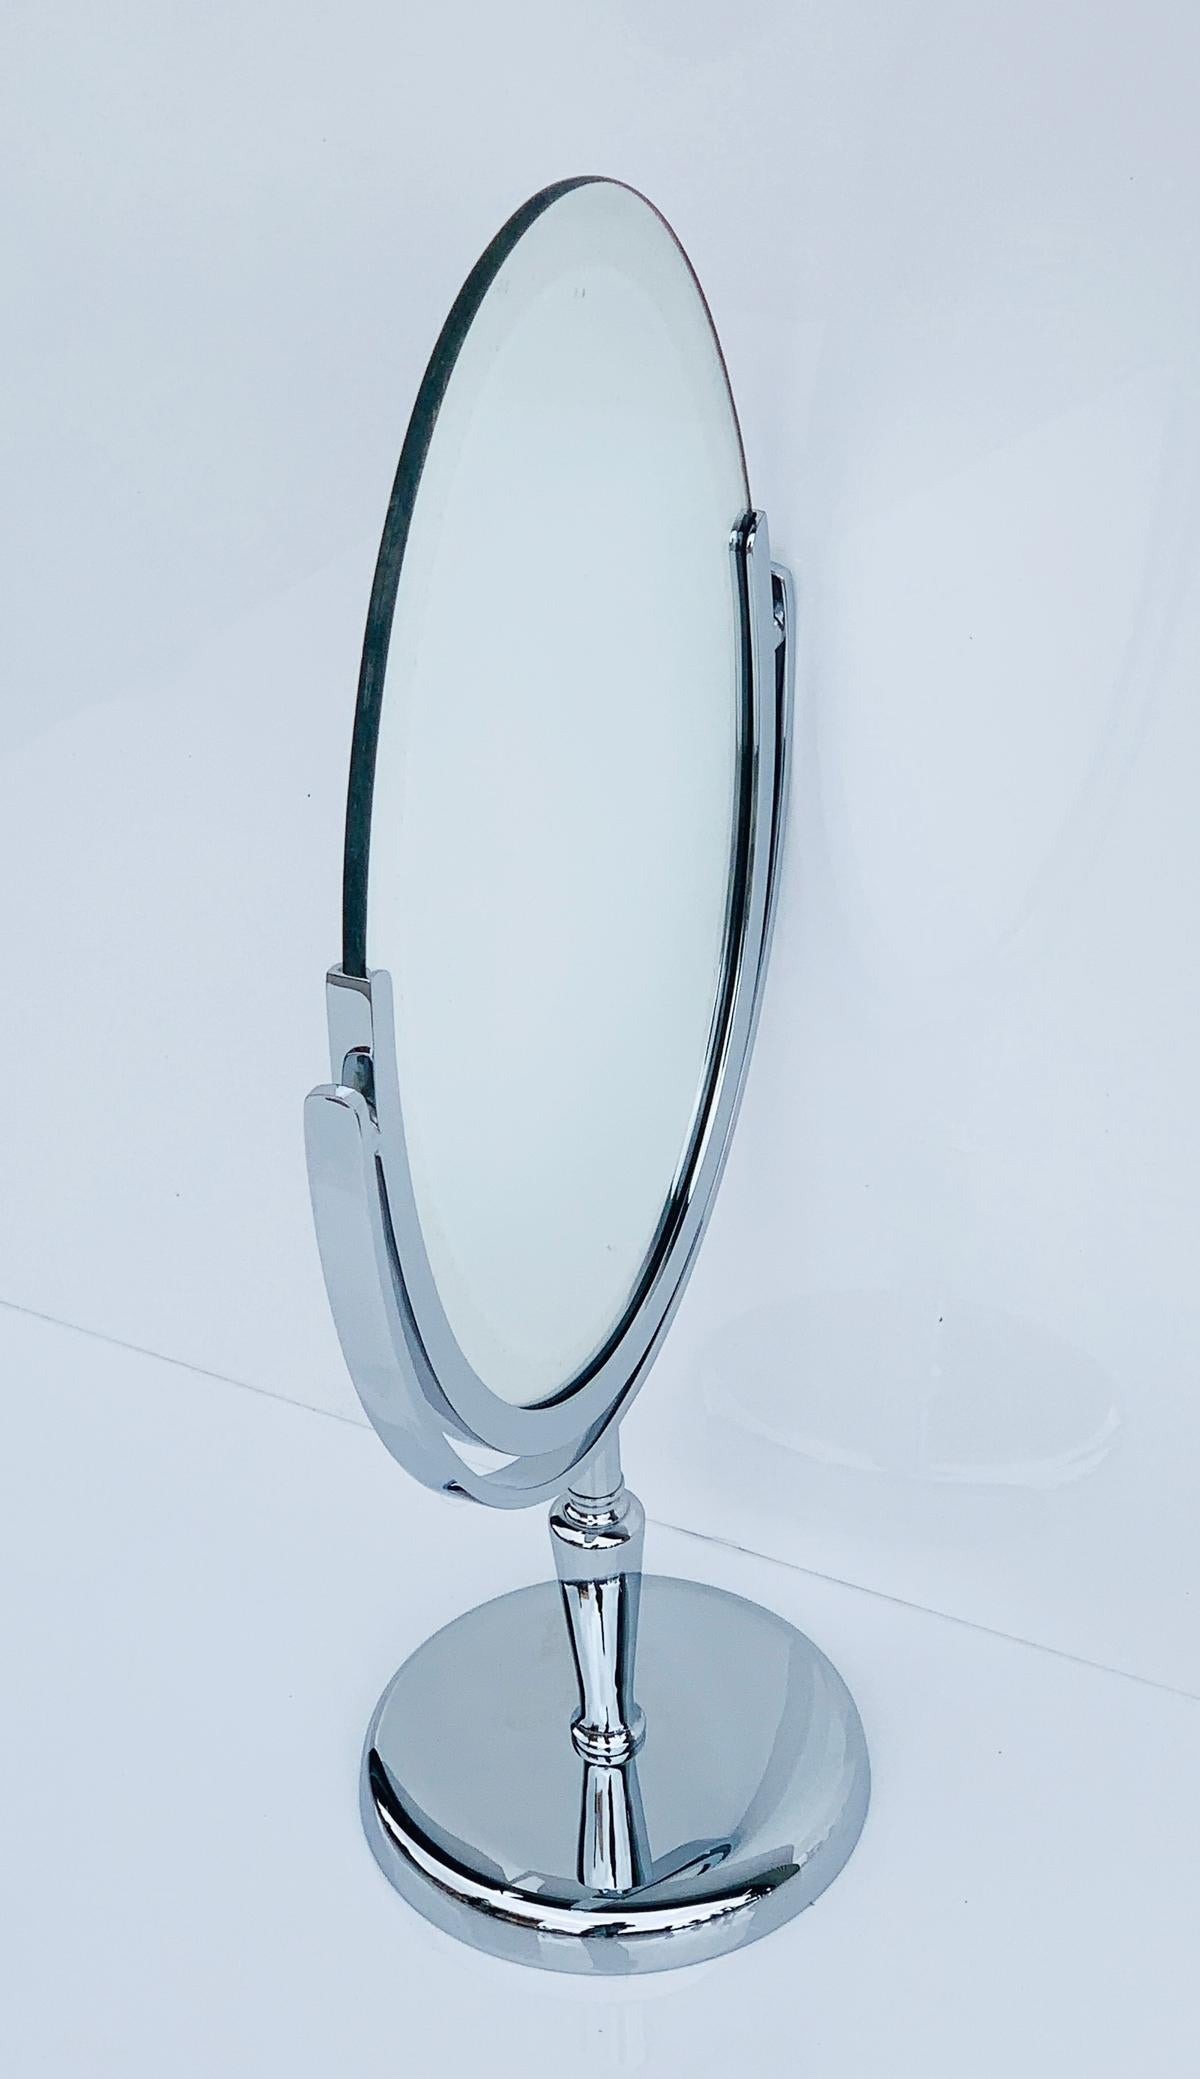 Introducing the exquisite Charles Hollis Jones Vanity Mirror in Polished Nickel, a stunning addition to any elegant space. Crafted with utmost precision, this nickel plated mirror on stand showcases unparalleled craftsmanship and timeless